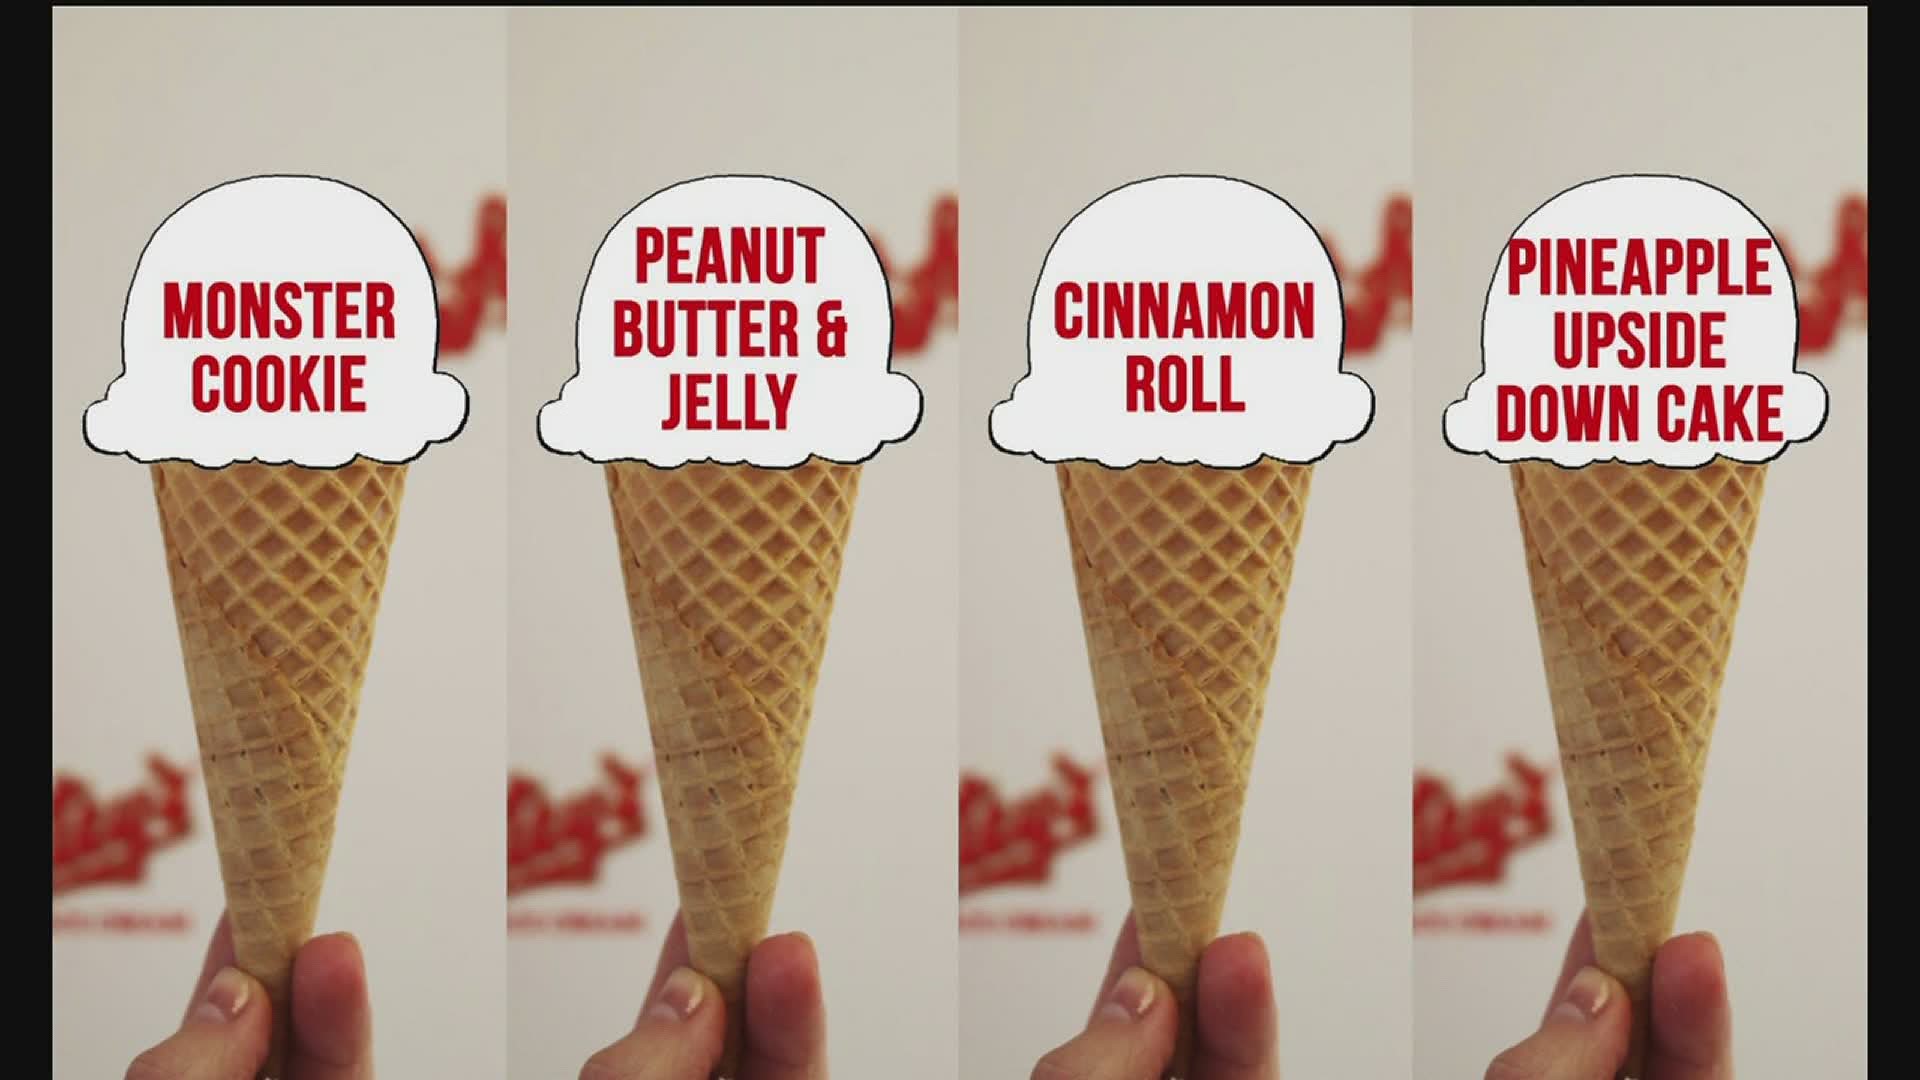 You can vote on four unique flavors in Whitey's Ice Cream Flavor Contest